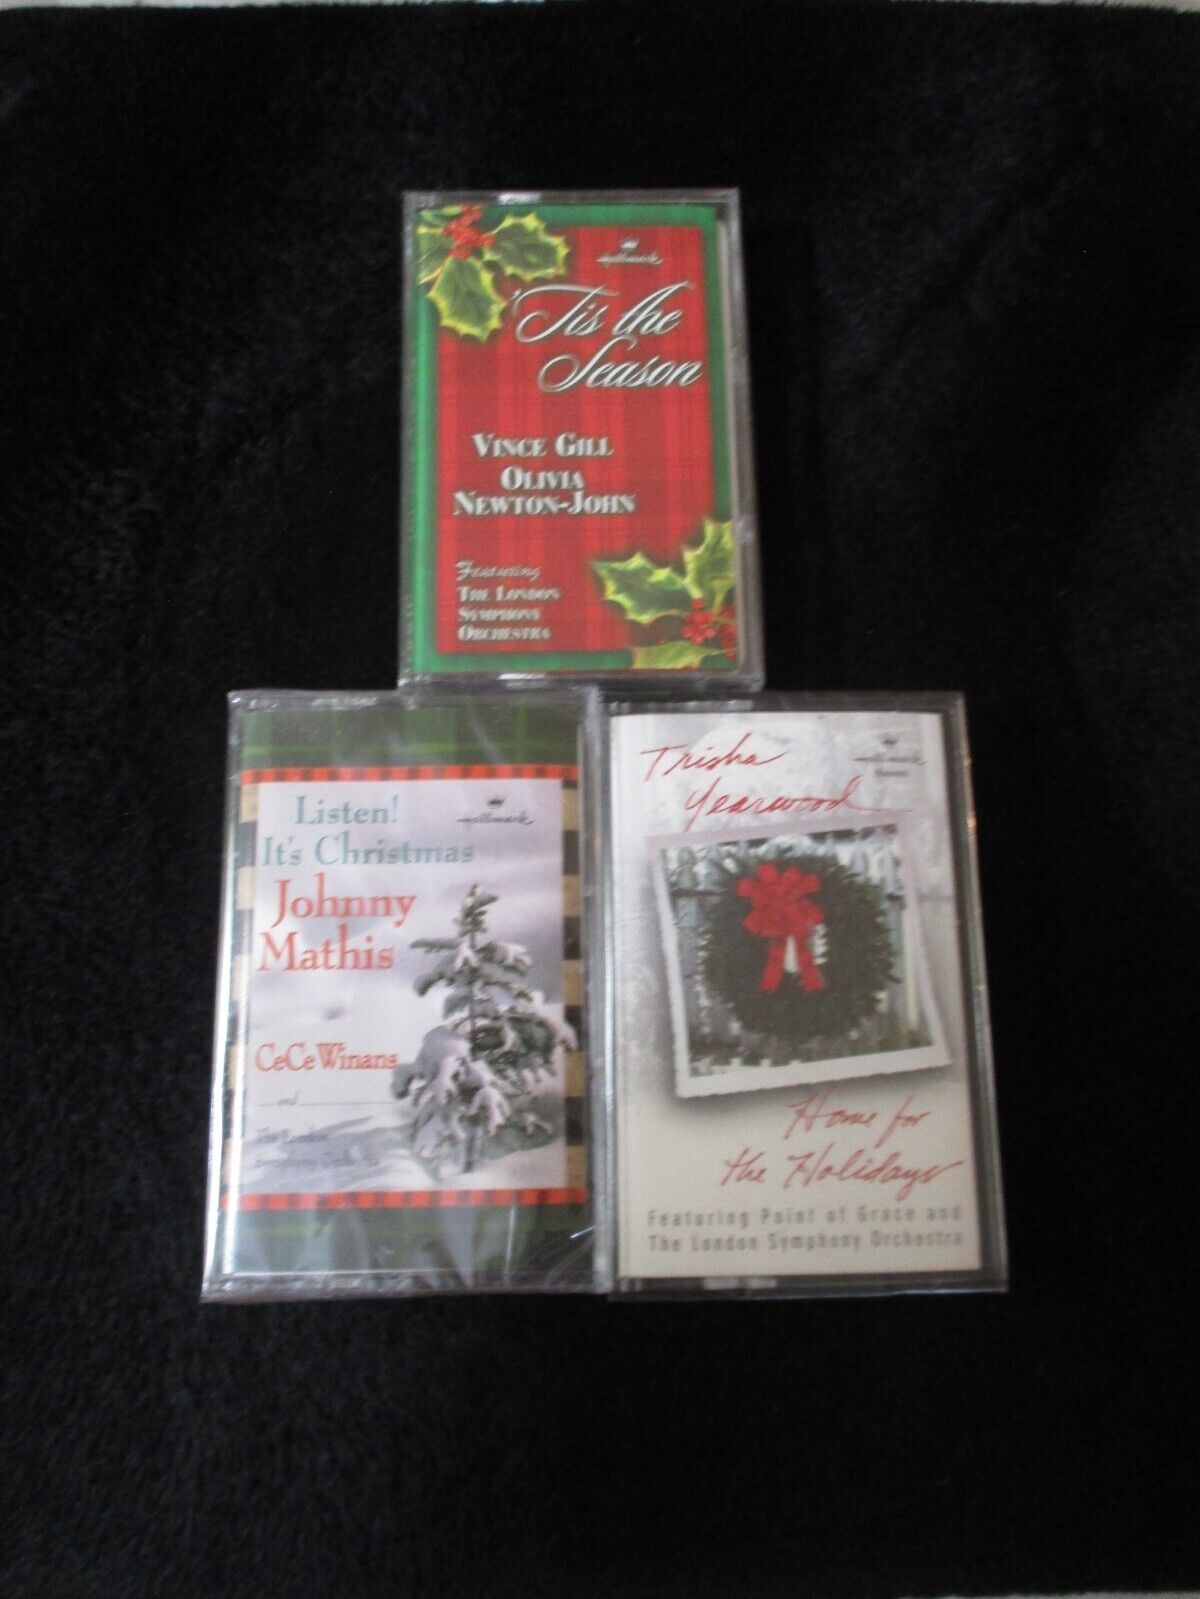 Lot of 3 Vintage Hallmark Christmas Cassette Tapes Mathis Winans Gill Yearwood